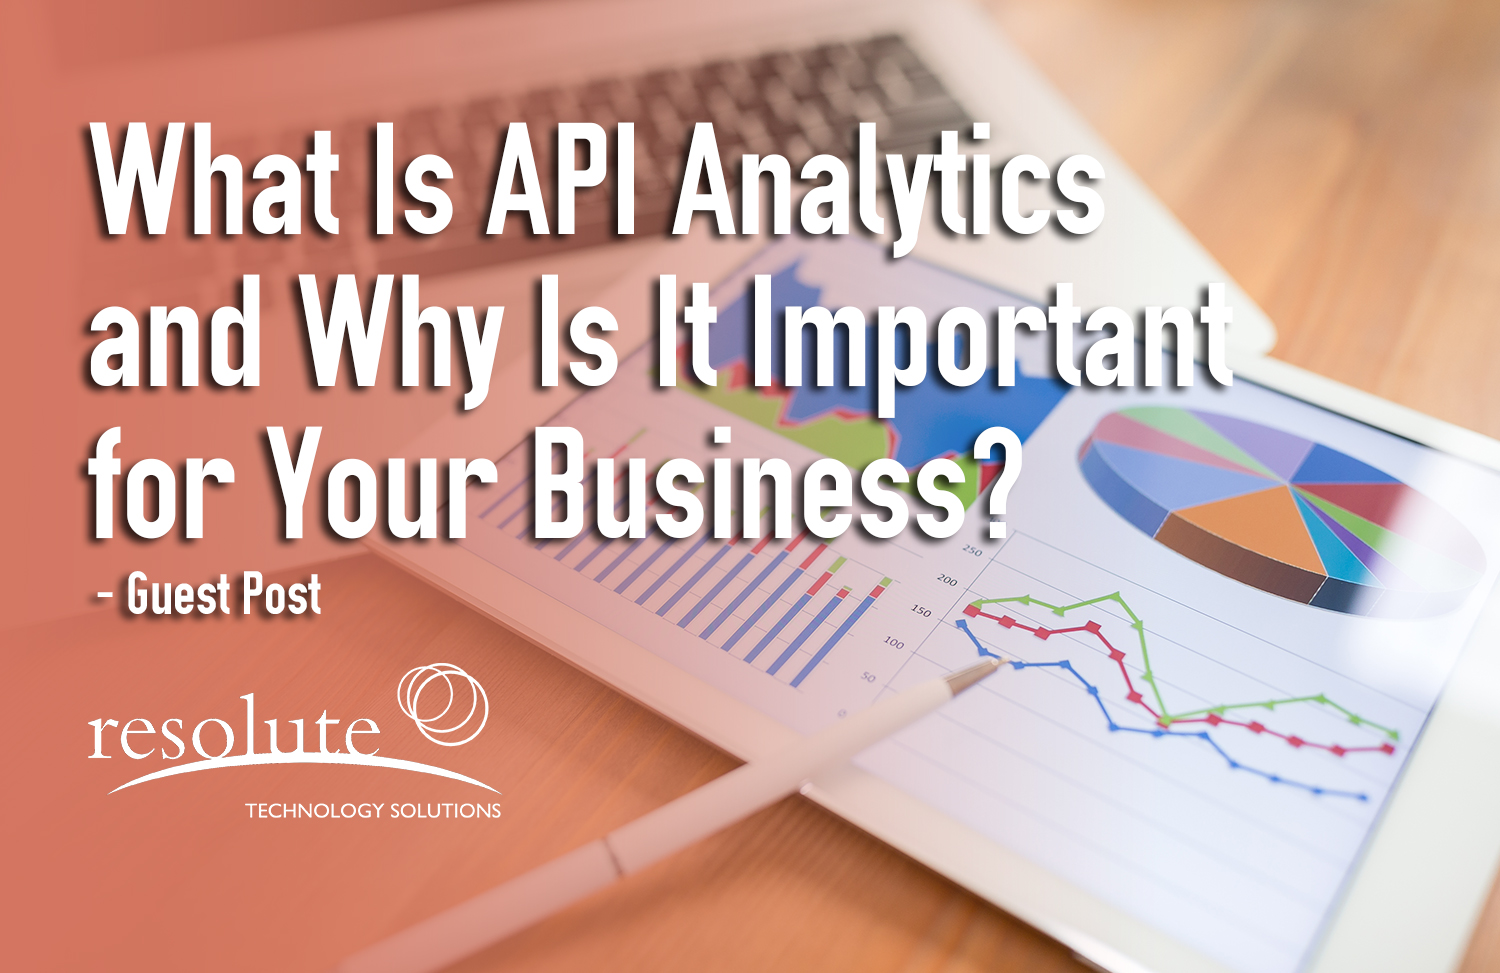 What Is API Analytics and Why Is It Important for Your Business?